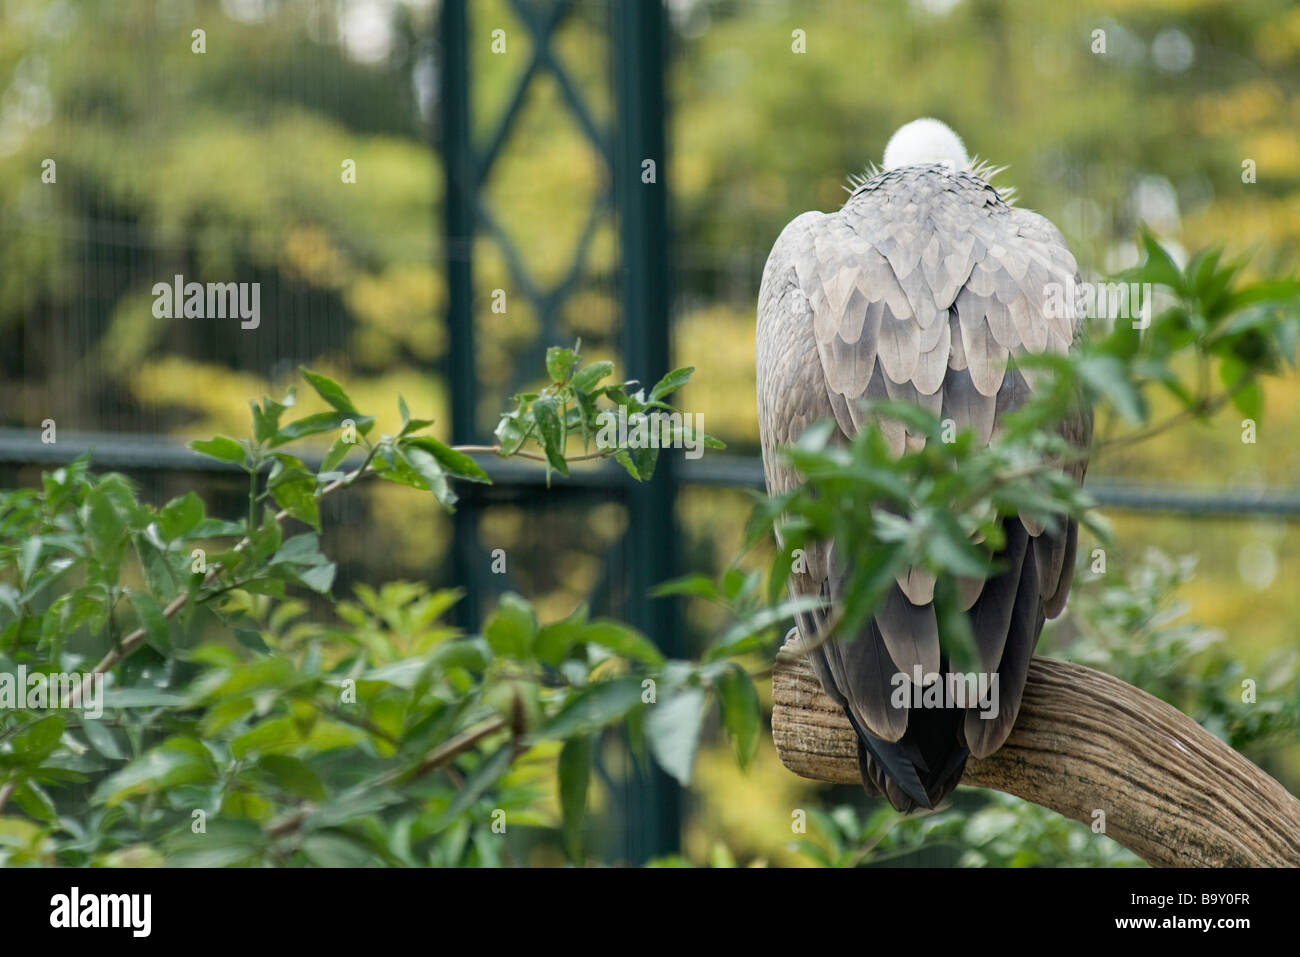 Vulture perched on branch, rear view Stock Photo